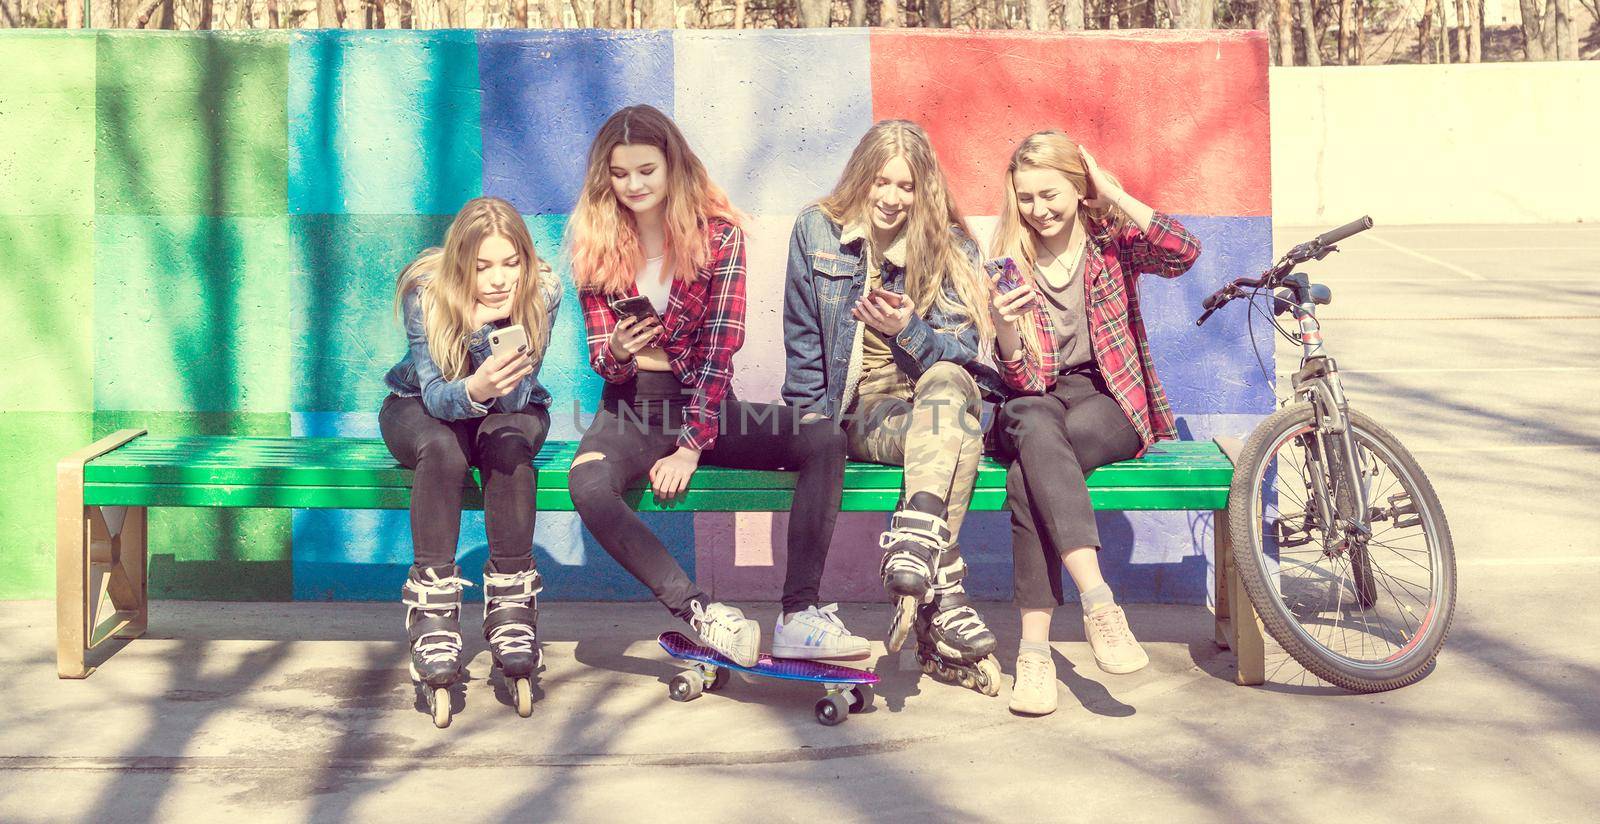 Trendy young girls laughing while using mobile phones in a skateboard park. Four pretty girl friends sitting on the bench with skateboards, rollers and bicycle